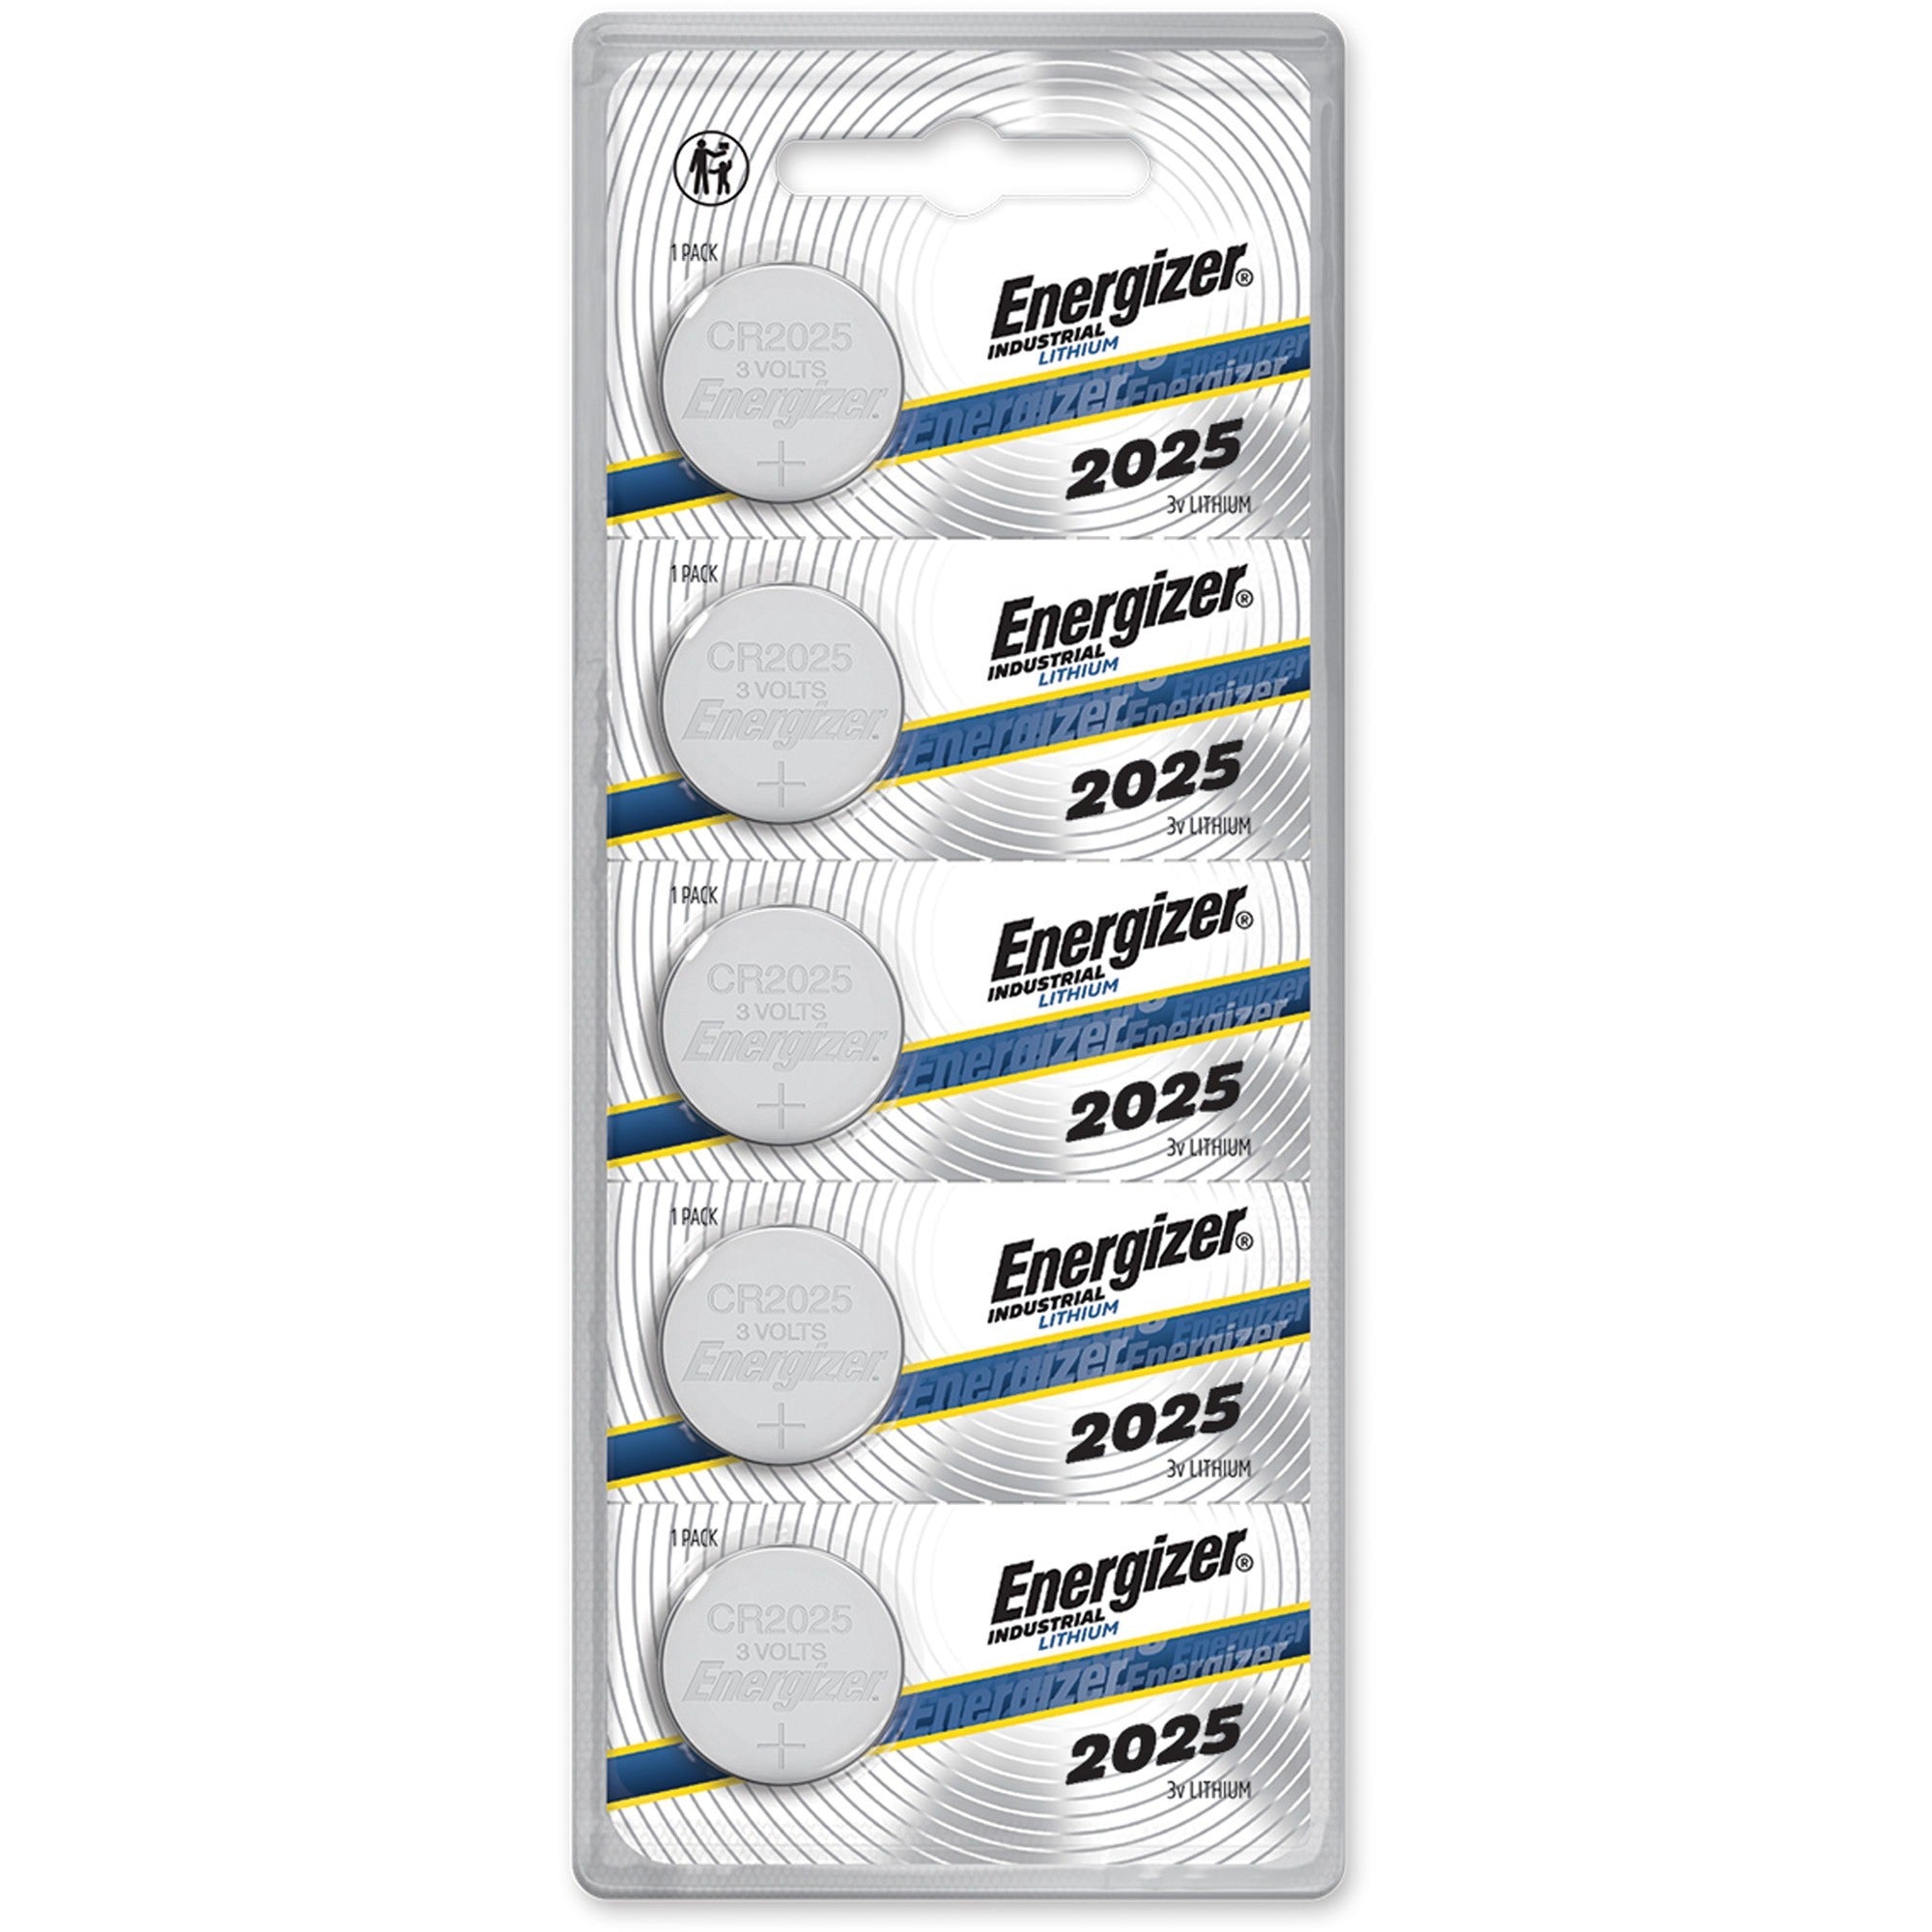 energizer-industrial-2025-lithium-battery-5-packs-for-digital-thermometer-laser-pointer-glucose-monitor-cr2025-170-mah-20_eveecrn2025bx - 1